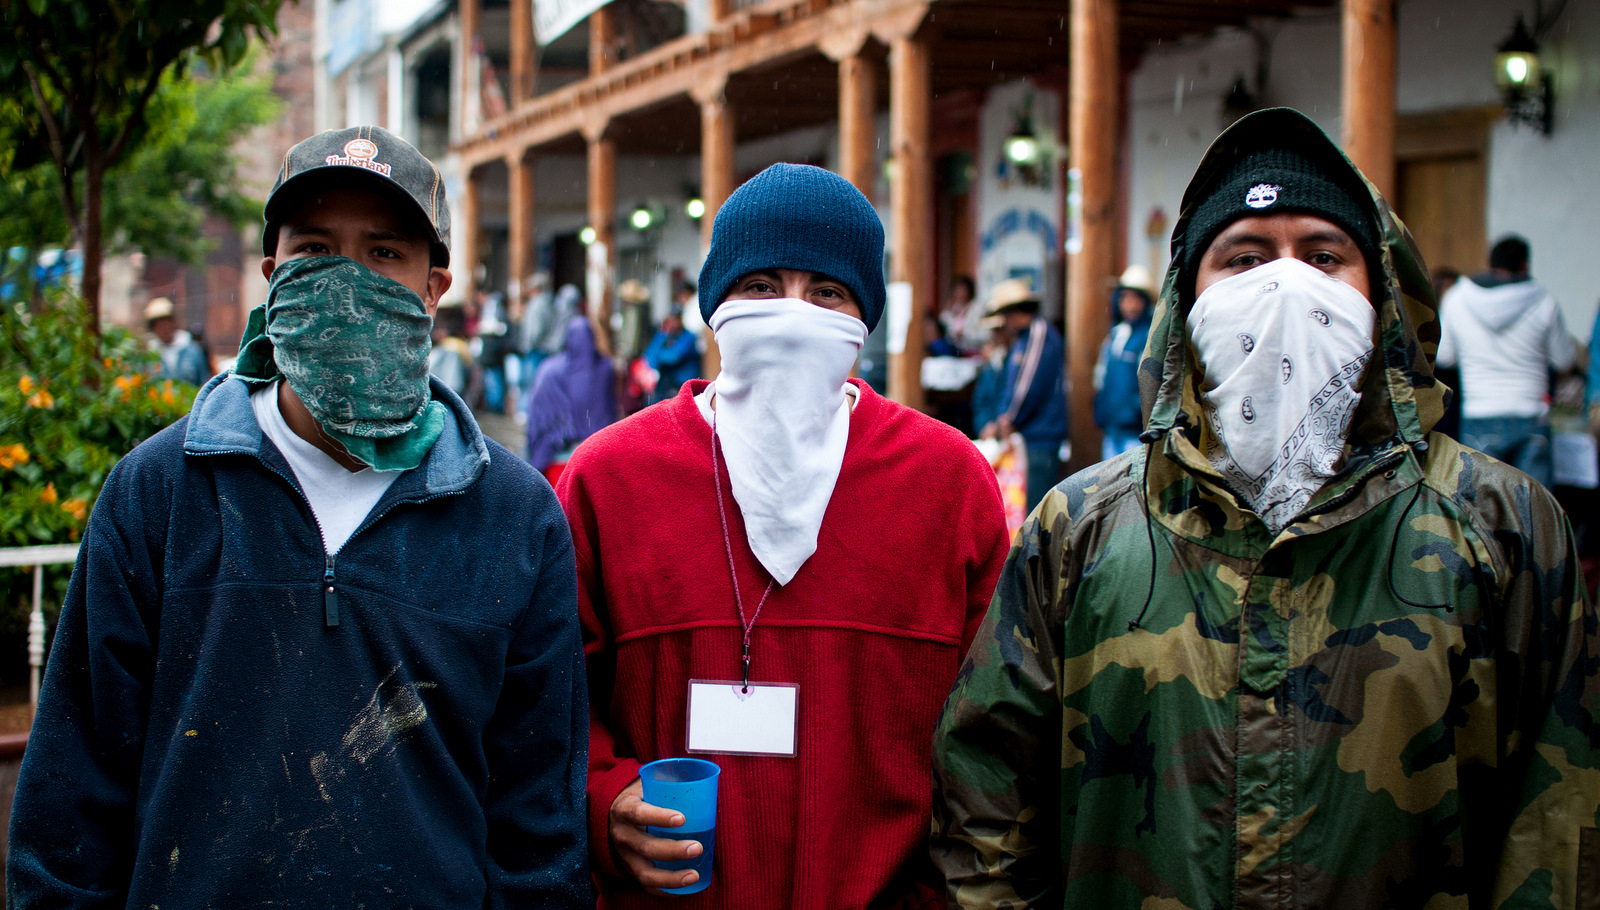 Three young Cherán man watch the streets with their faces covered to avoid reprisals by the "enemies", loggers and organized crime. (Photo: Eneas De Troya/Flickr)